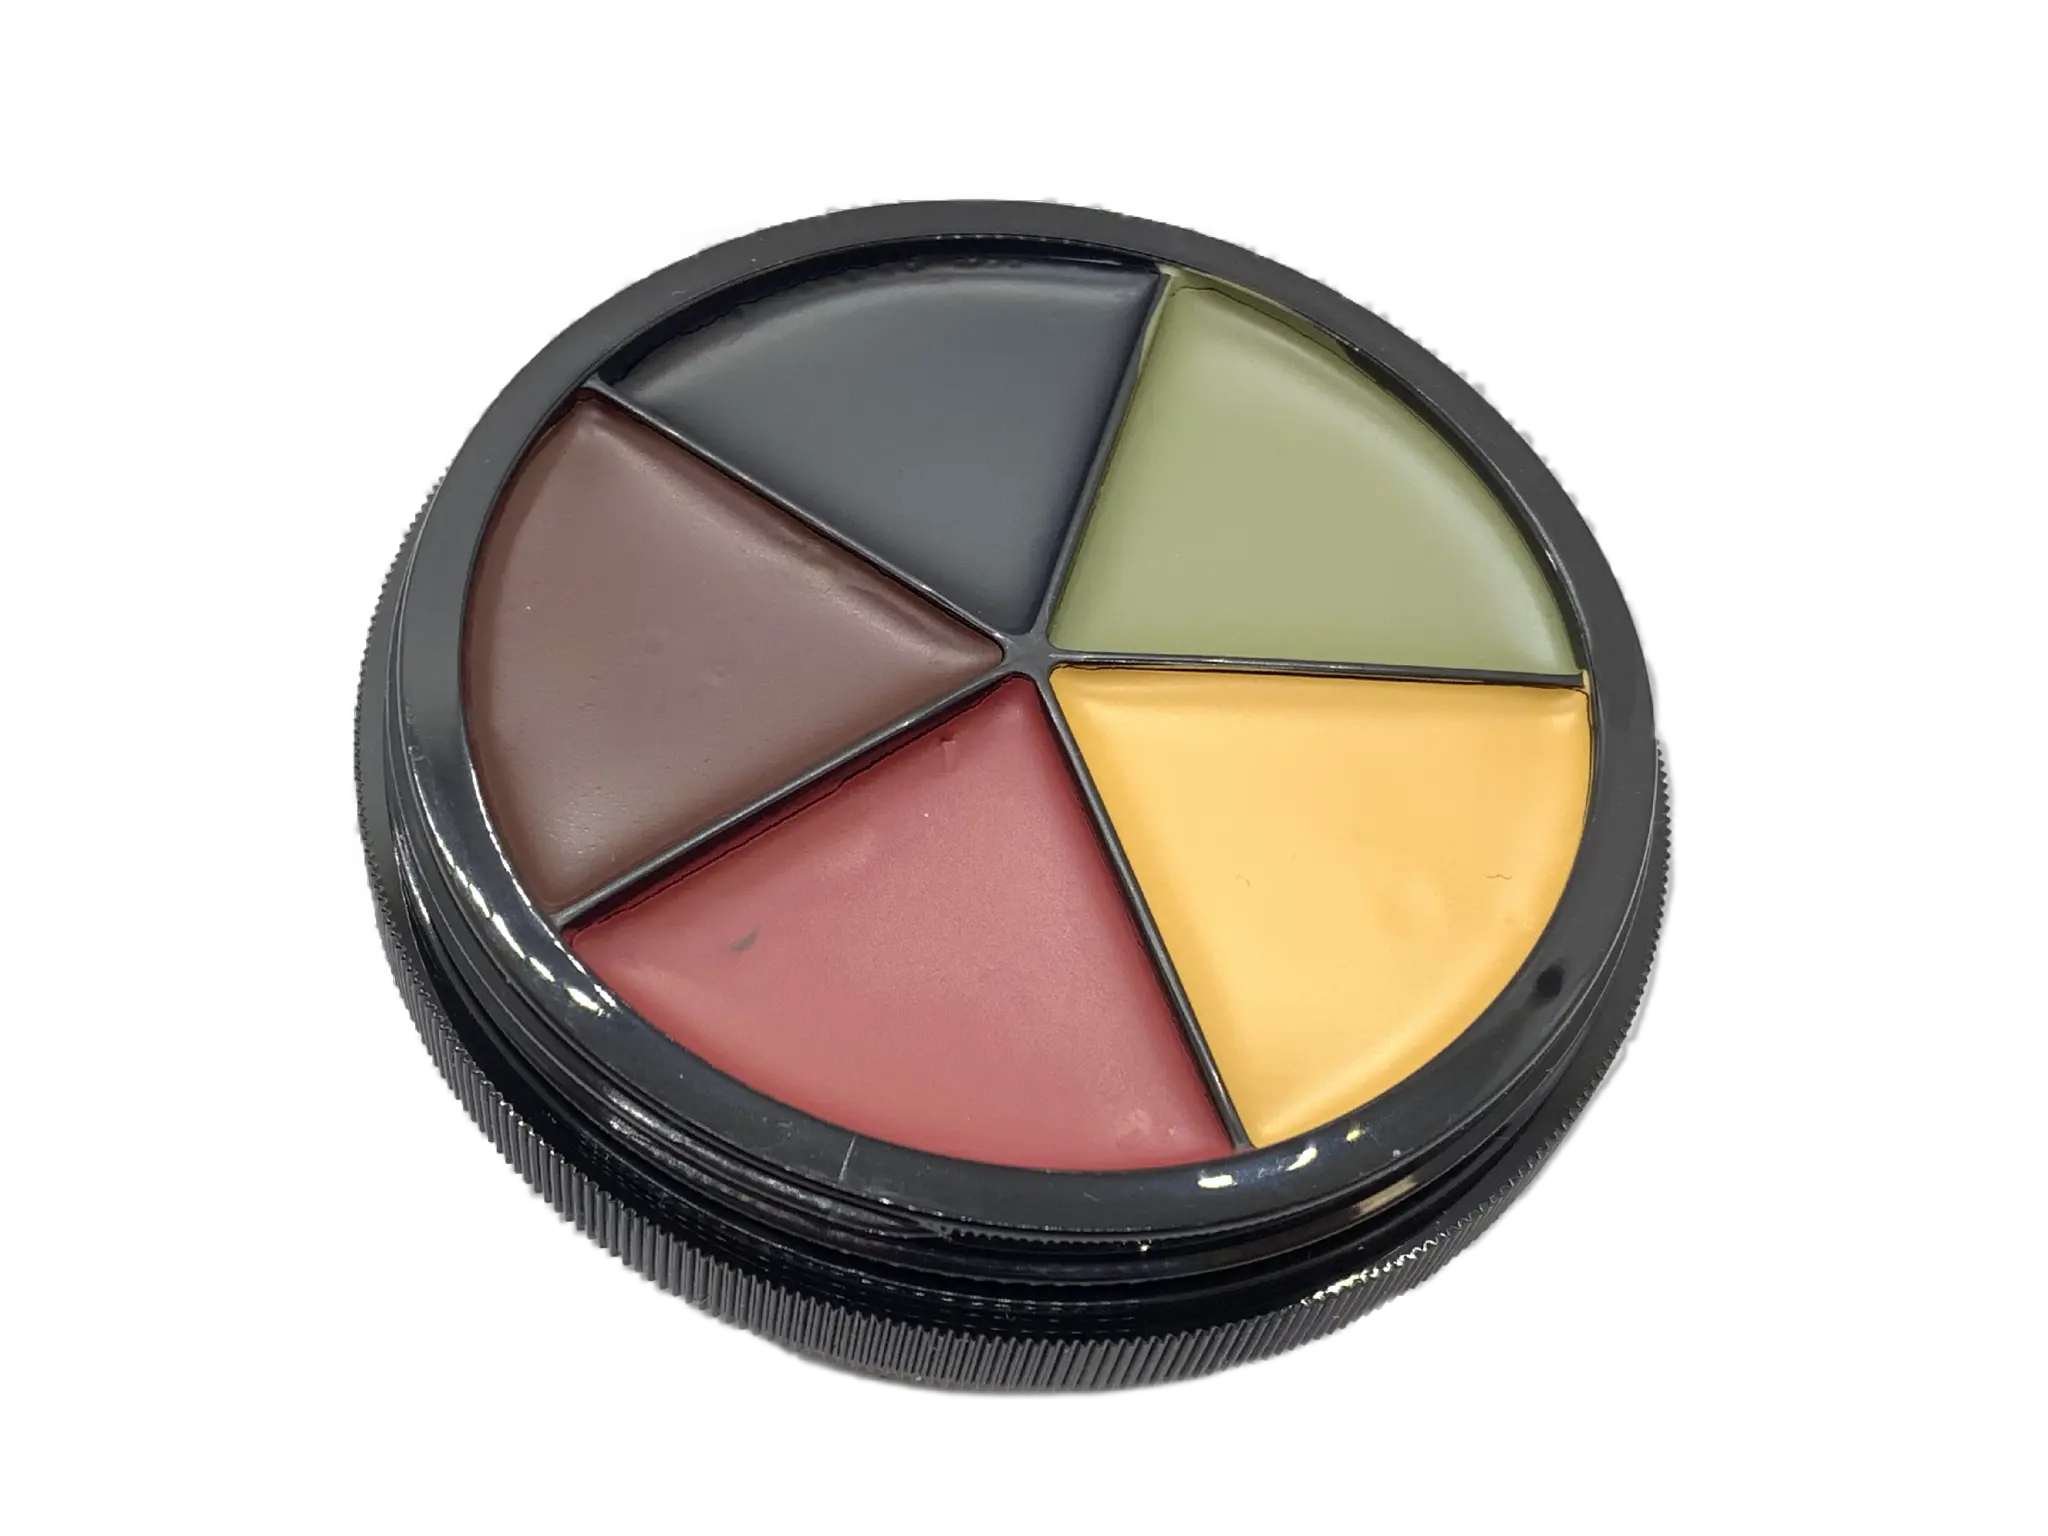 Download Bruise Makeup Wheel Eye Shadow Png Image With No Eye Shadow Bruise Png